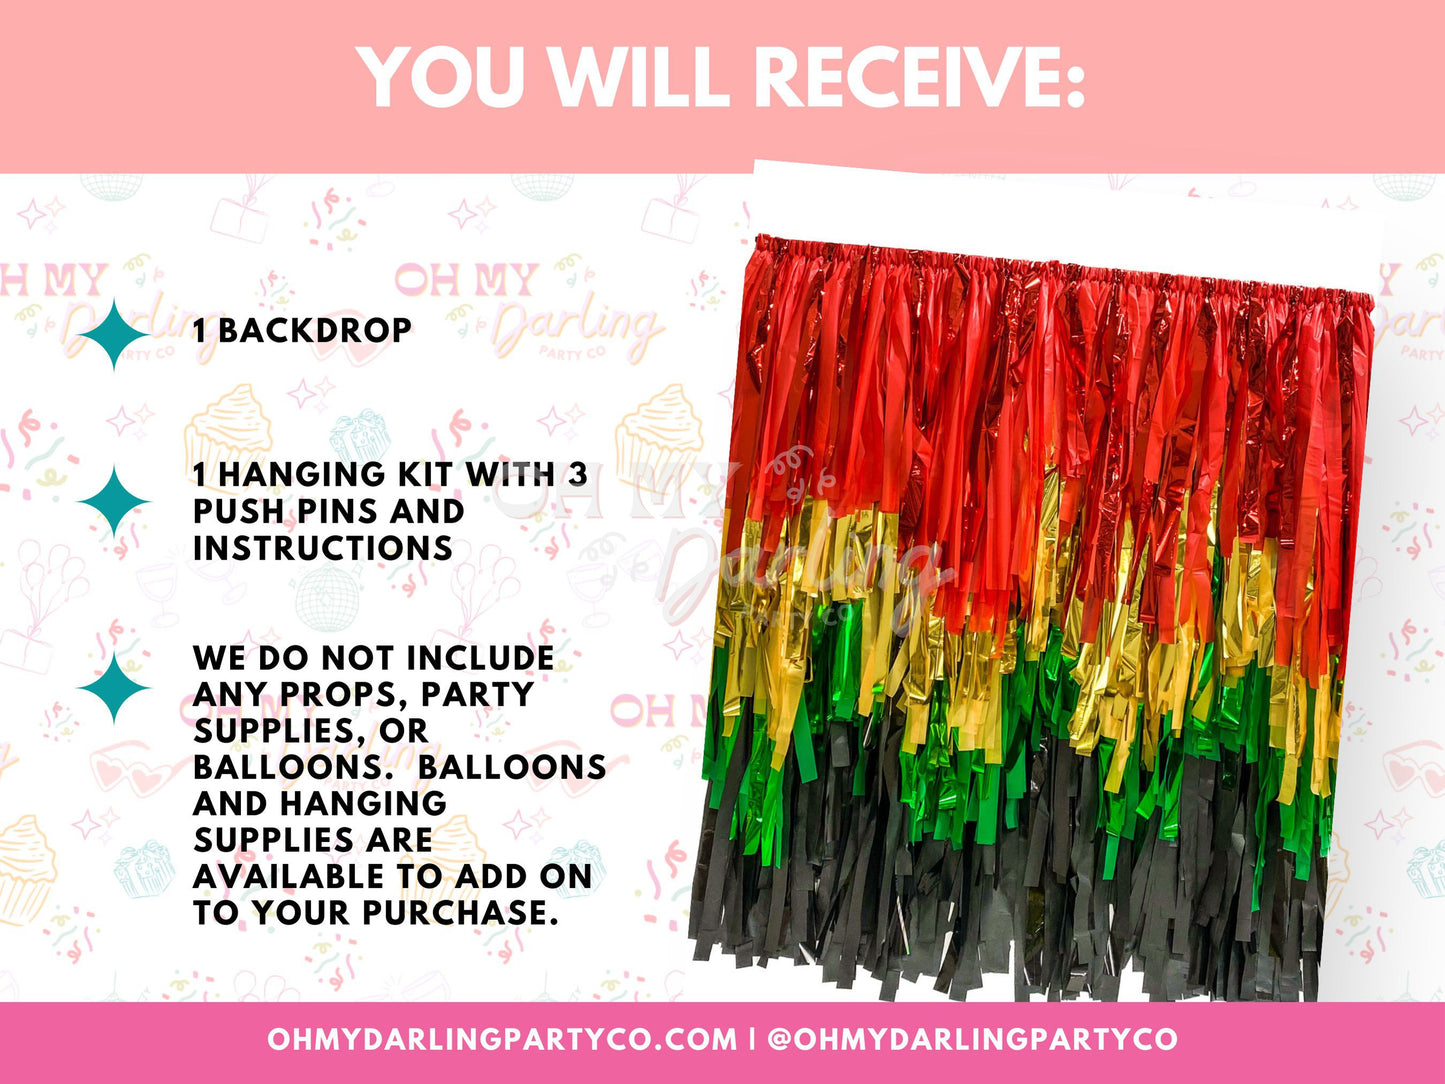 Juneteenth Backdrop-Fringe Backdrop-Party Decor-Oh My Darling Party Co-Oh My Darling Party Co-backdrops for party, balloon garlands, black, black backdrops, fringe garland, Fringe Streamers, gold, GOLD BACKDROP, gold details, green, green and red, GREEN BACKDROP, GREEN BACKDROPS, juneteenth, kelly green, metallic backdrop, metallic gold, metallic red, OMDPC, party backdrops, premium, red, Red and Green, RED BACKDROP, summer, summer soiree, tassels, yellow, YELLOW BACKDROP